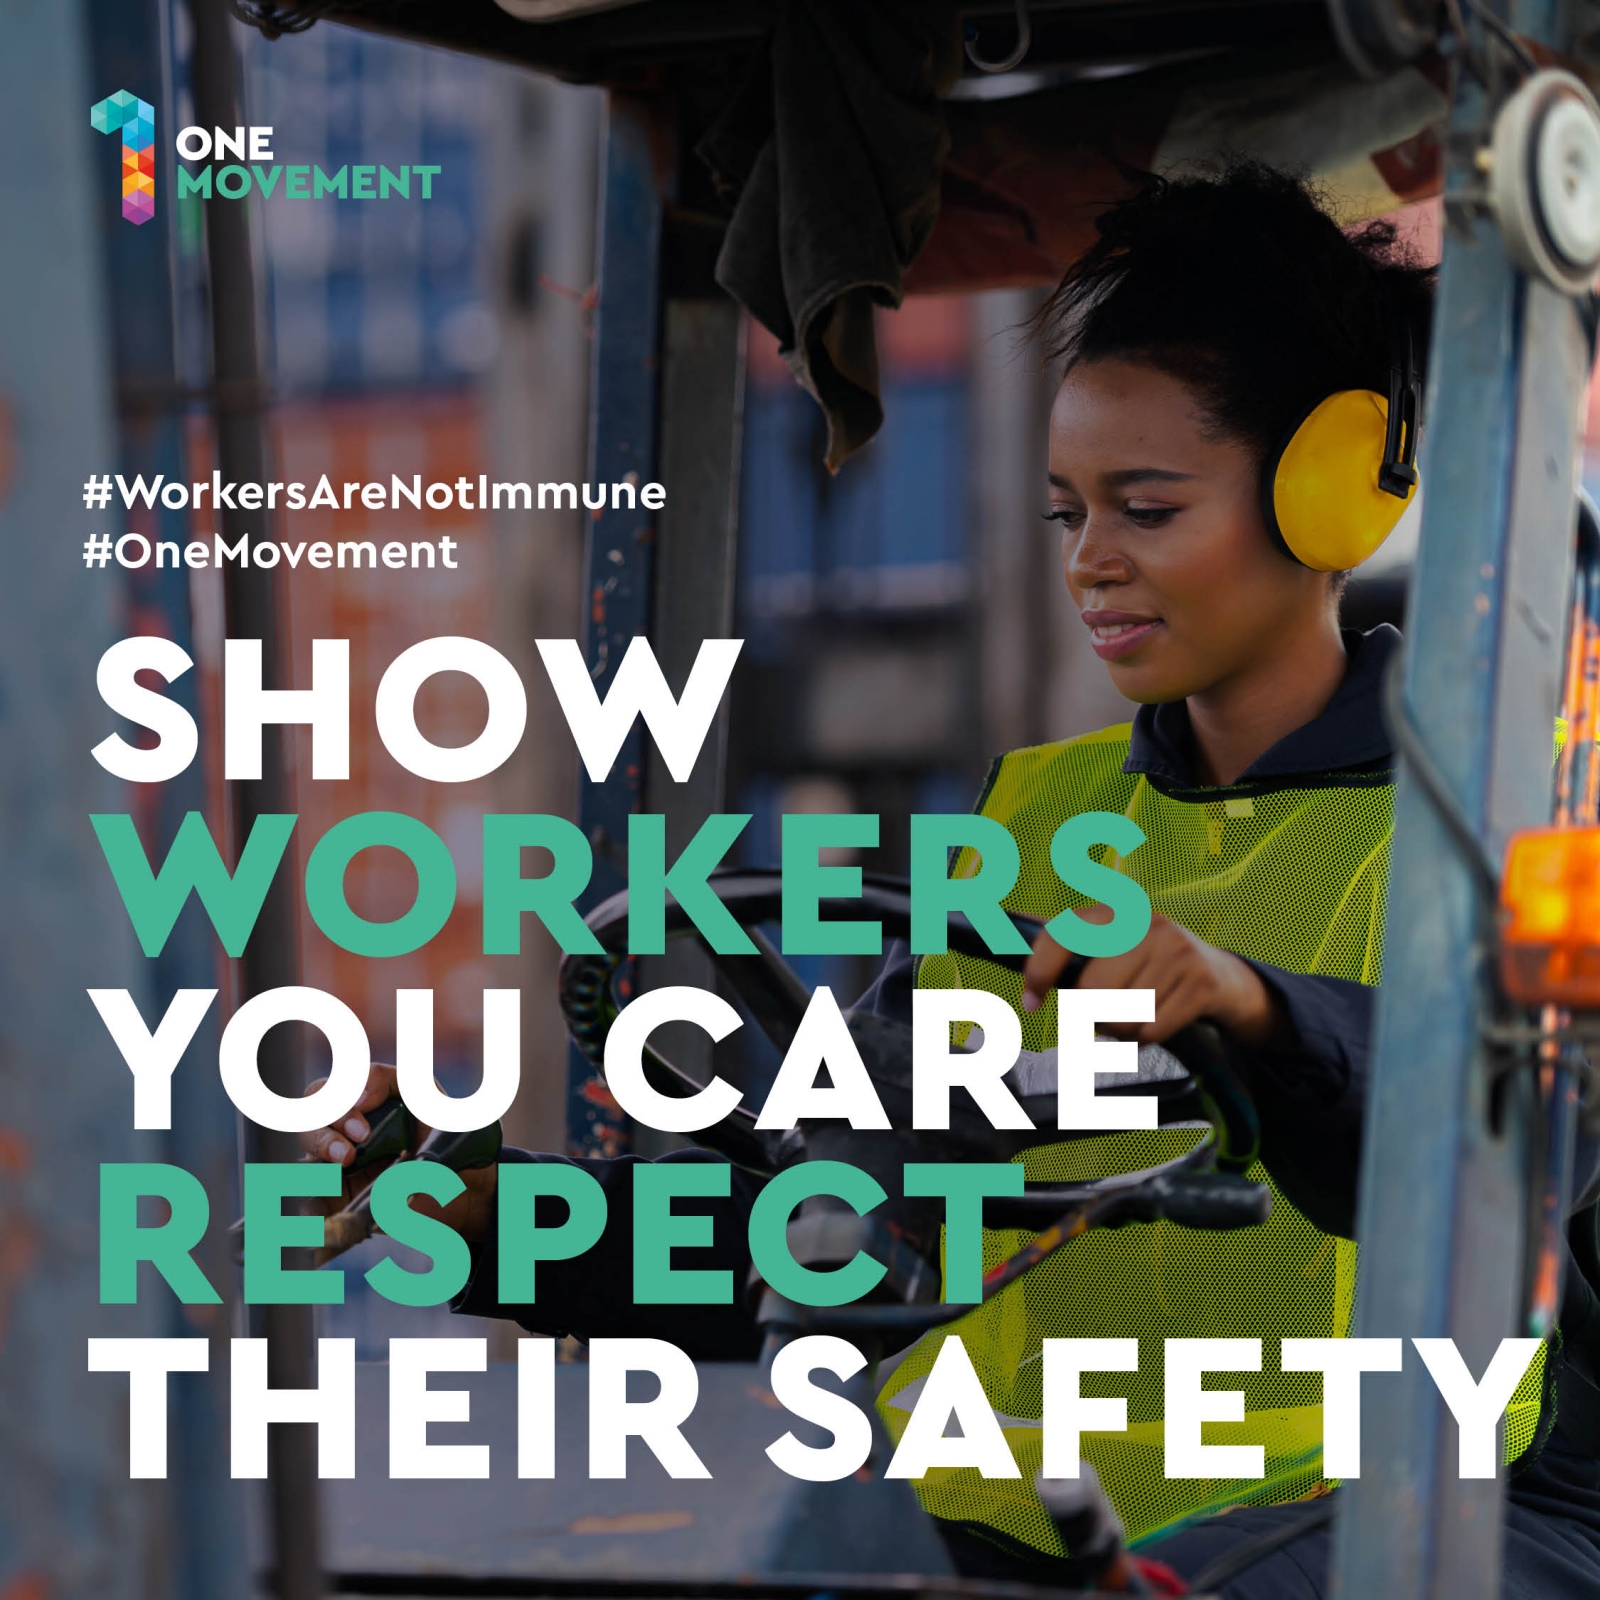 Show workers you care respect their safety